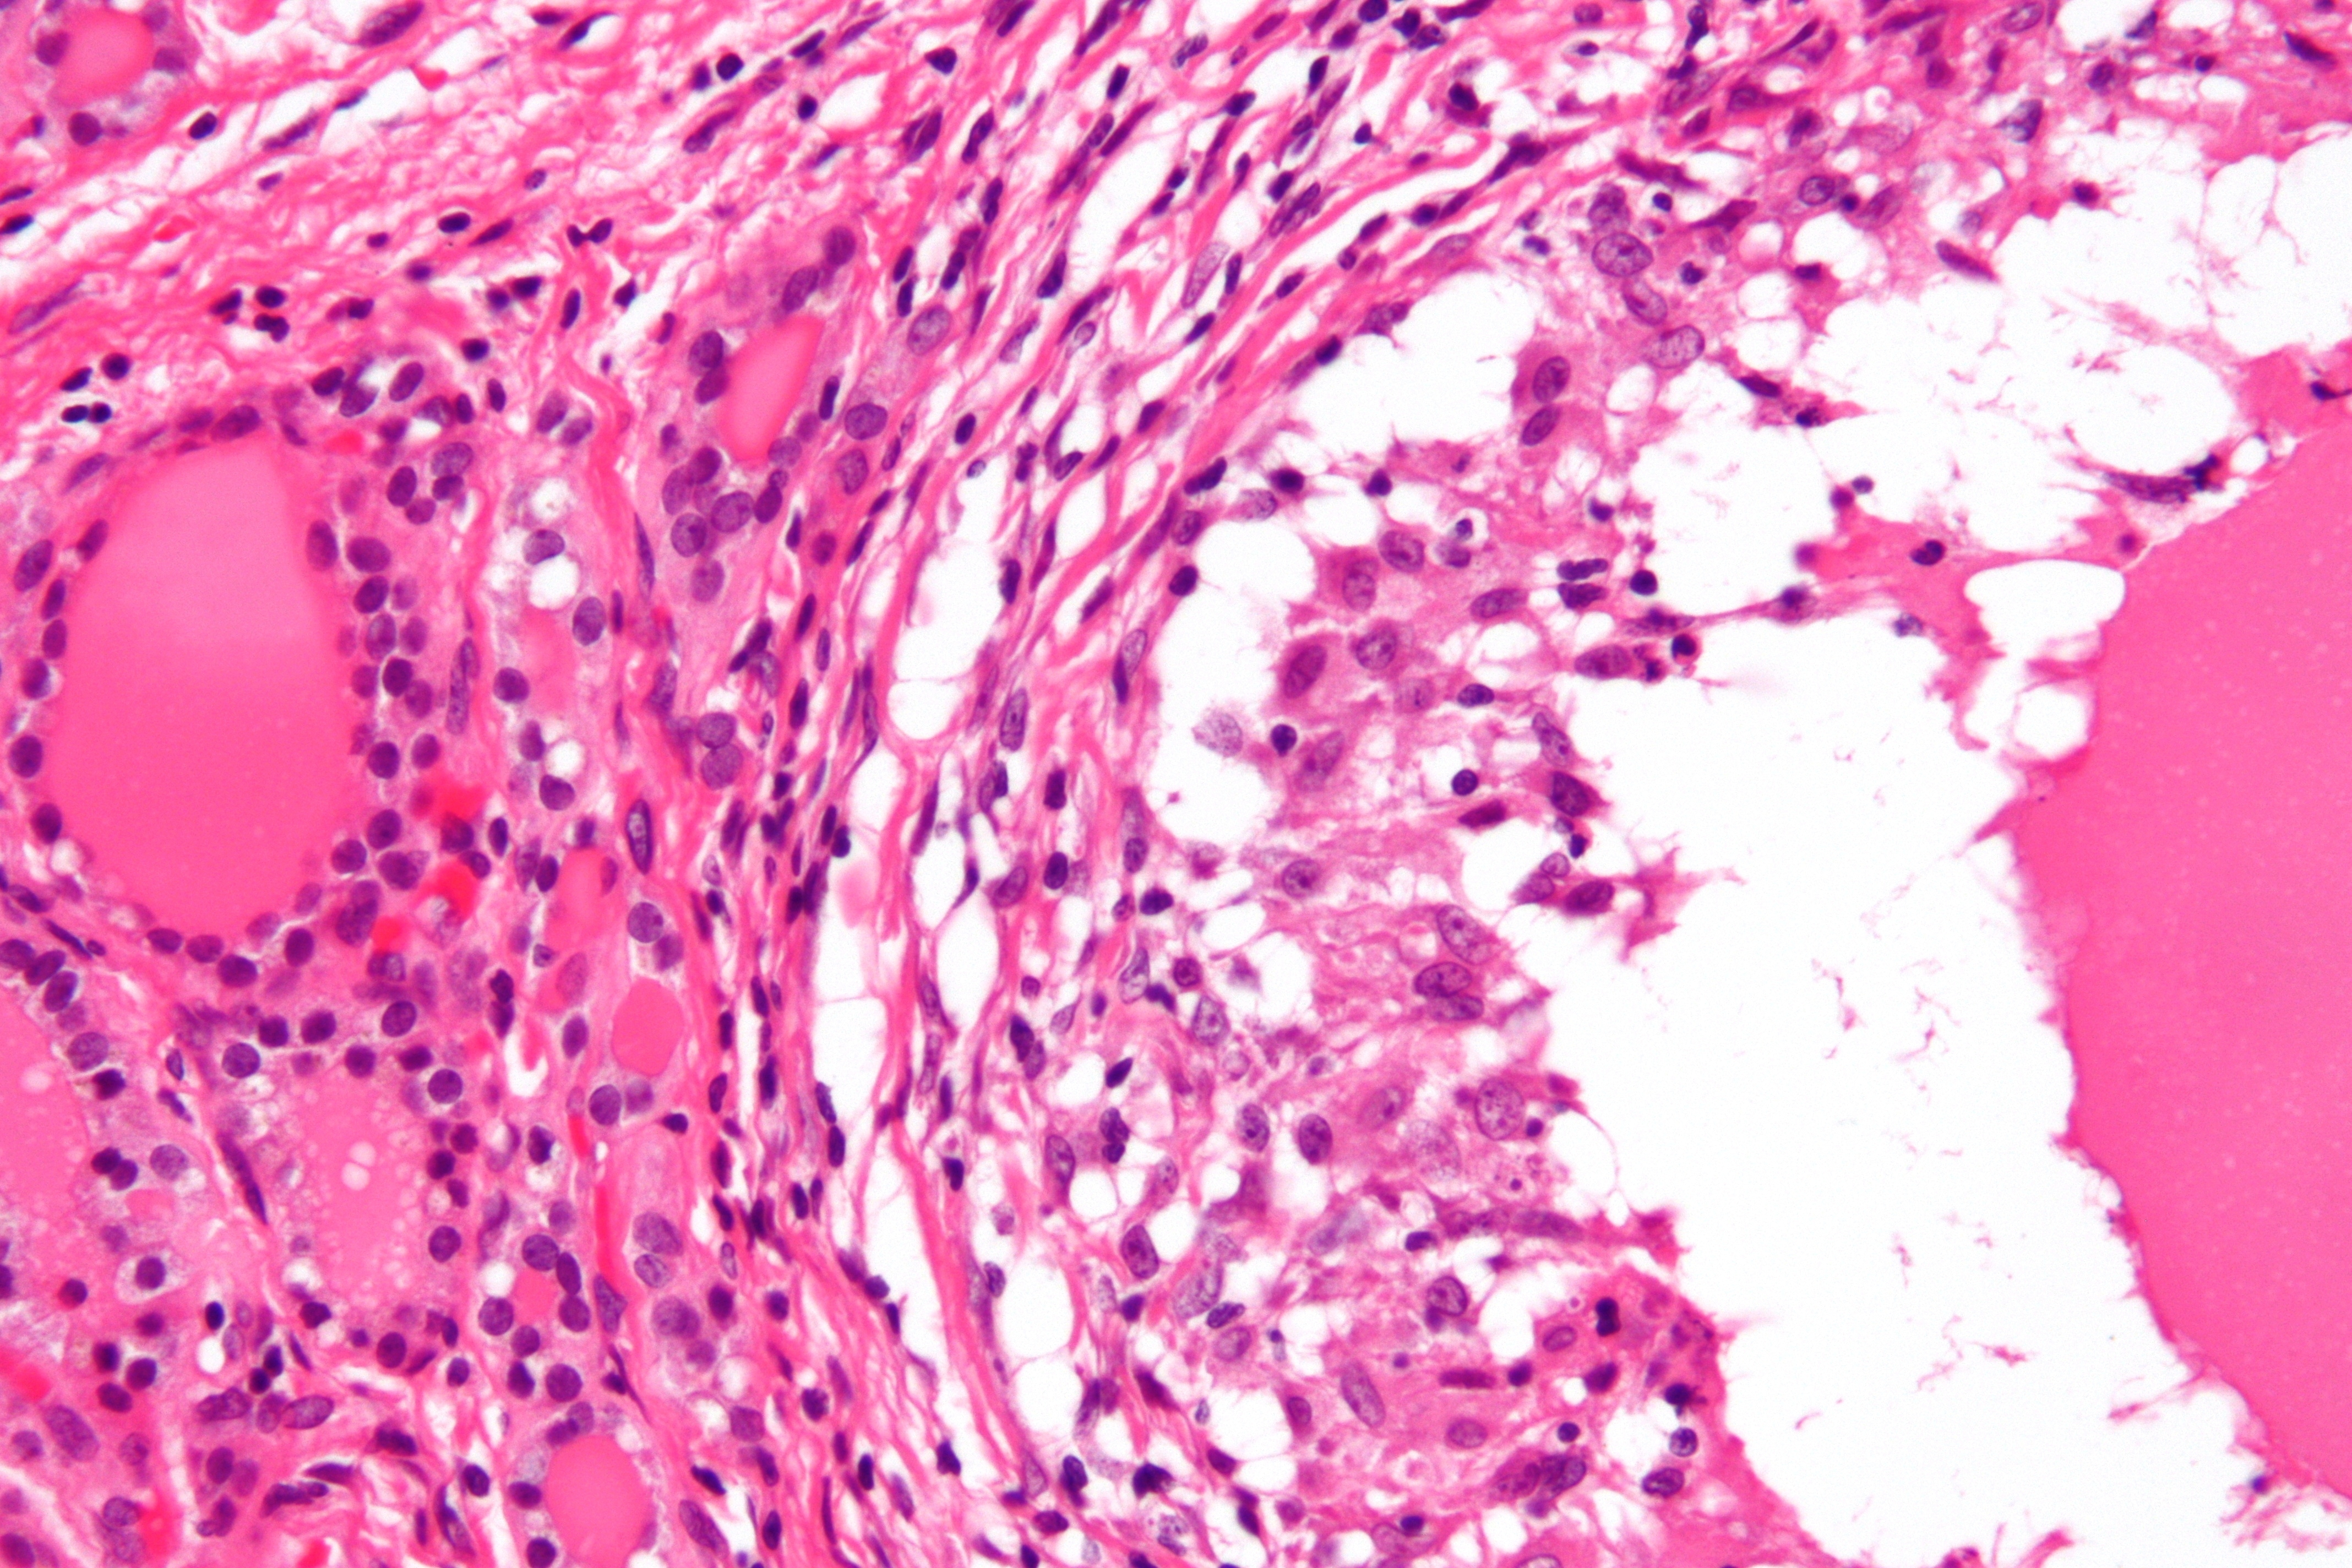 Histology of De Quervain's thyroiditis; Granuloma (By Nephron - Own work, CC BY-SA 3.0, https://commons.wikimedia.org/w/index.php?curid=18491421)